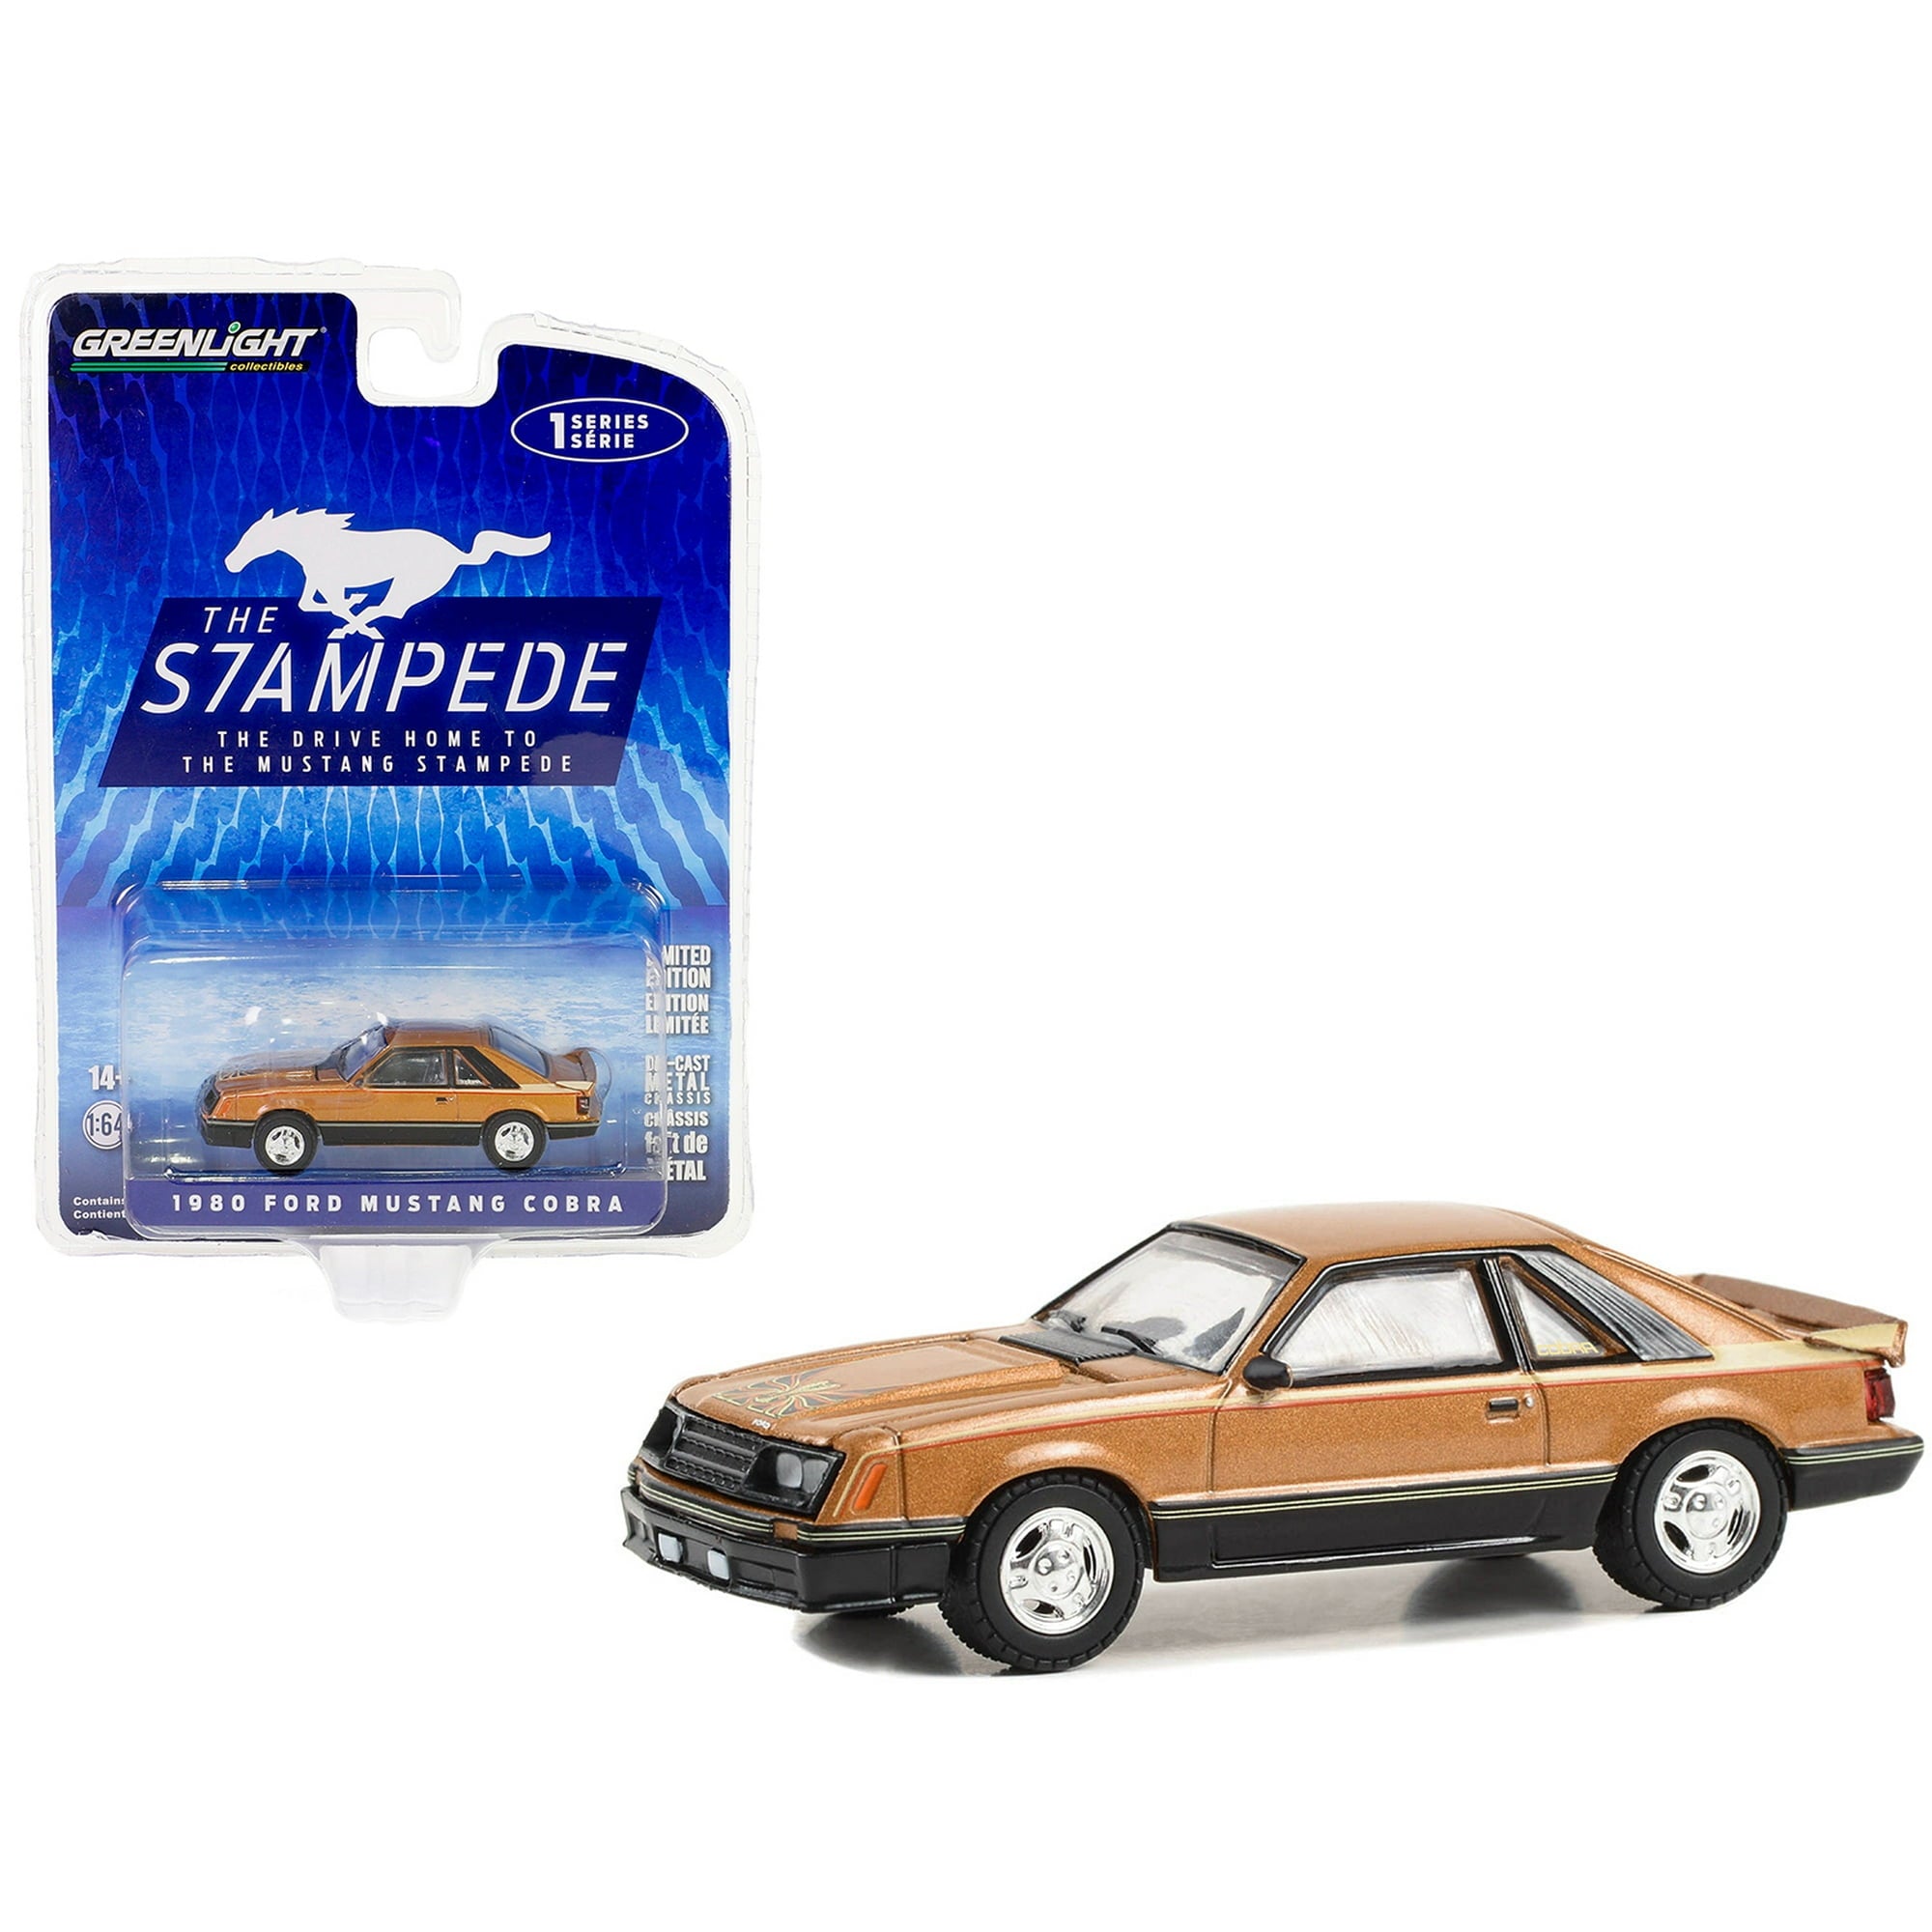 1/64 1980 FORD MUSTANG COBRA - THE STAMPEDE